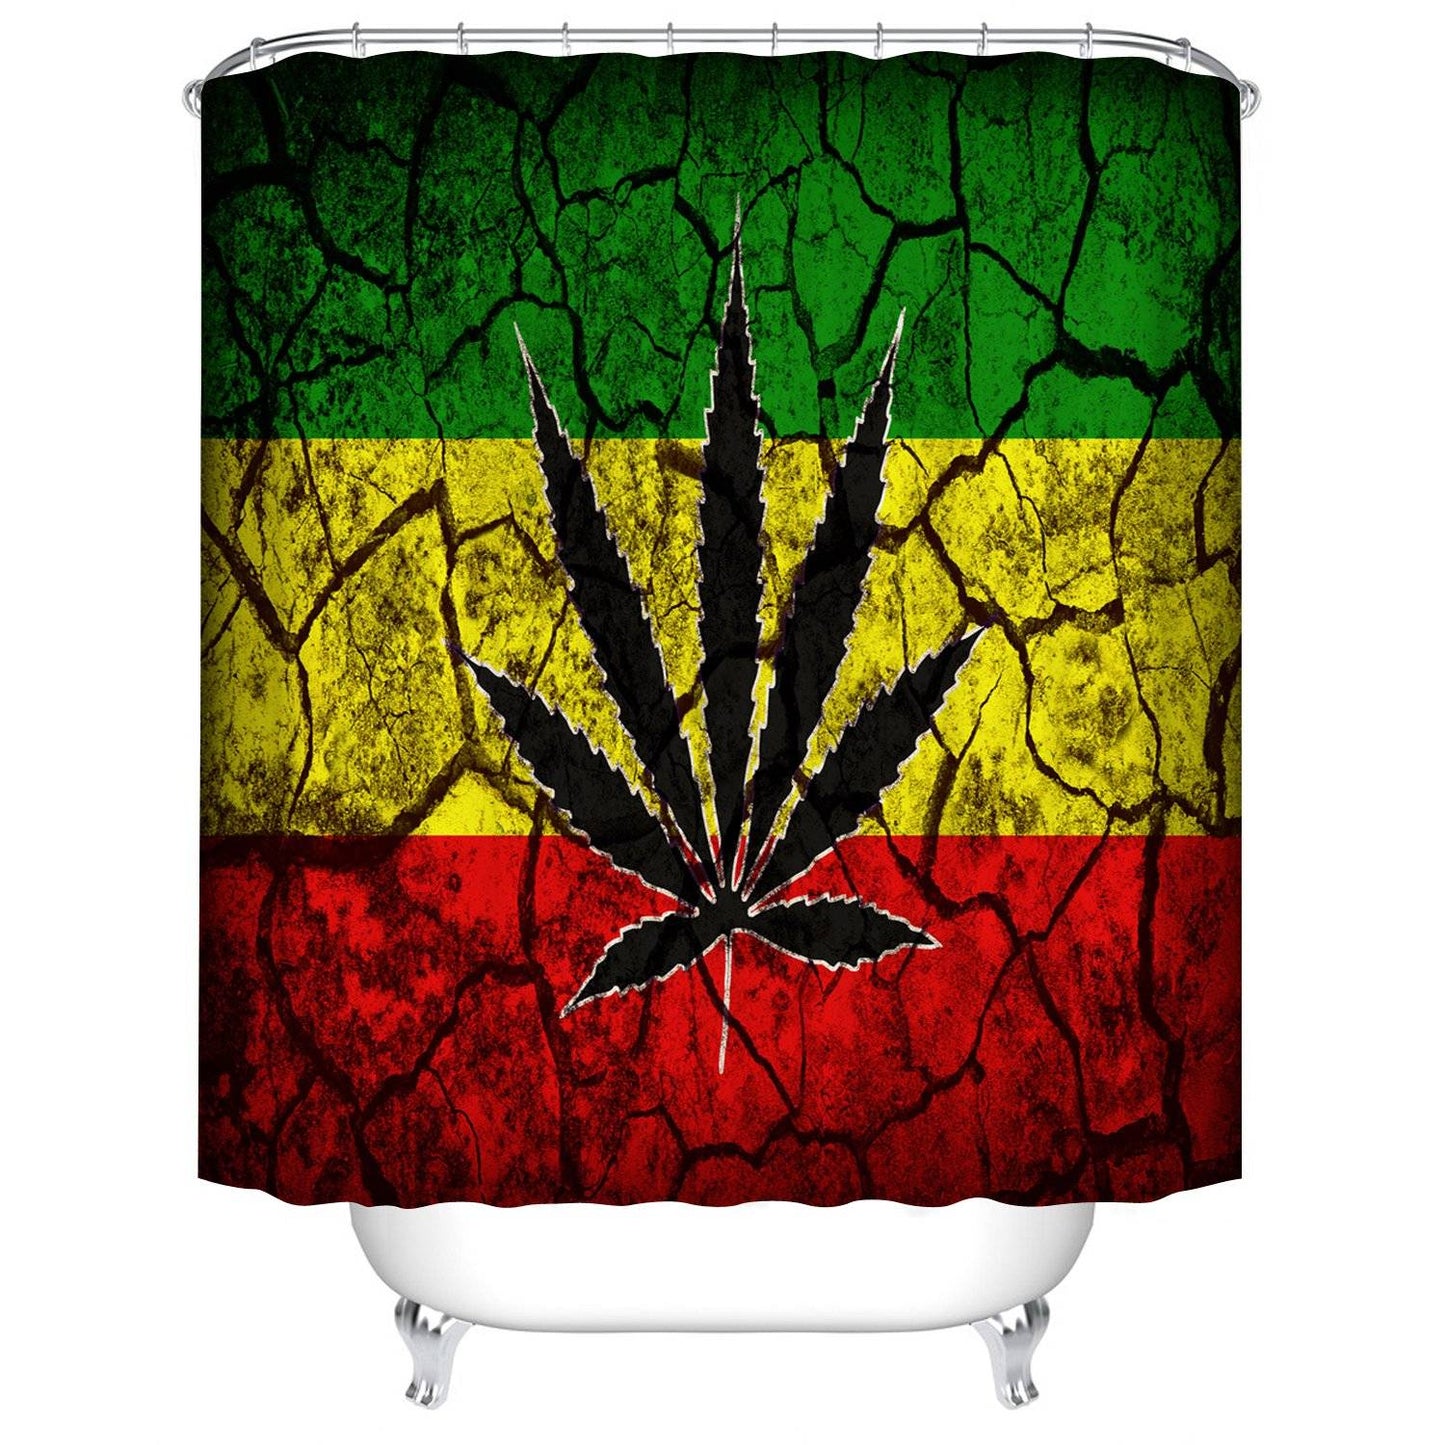 Cracked Colored Wall Cannabis Leaf Shower Curtain